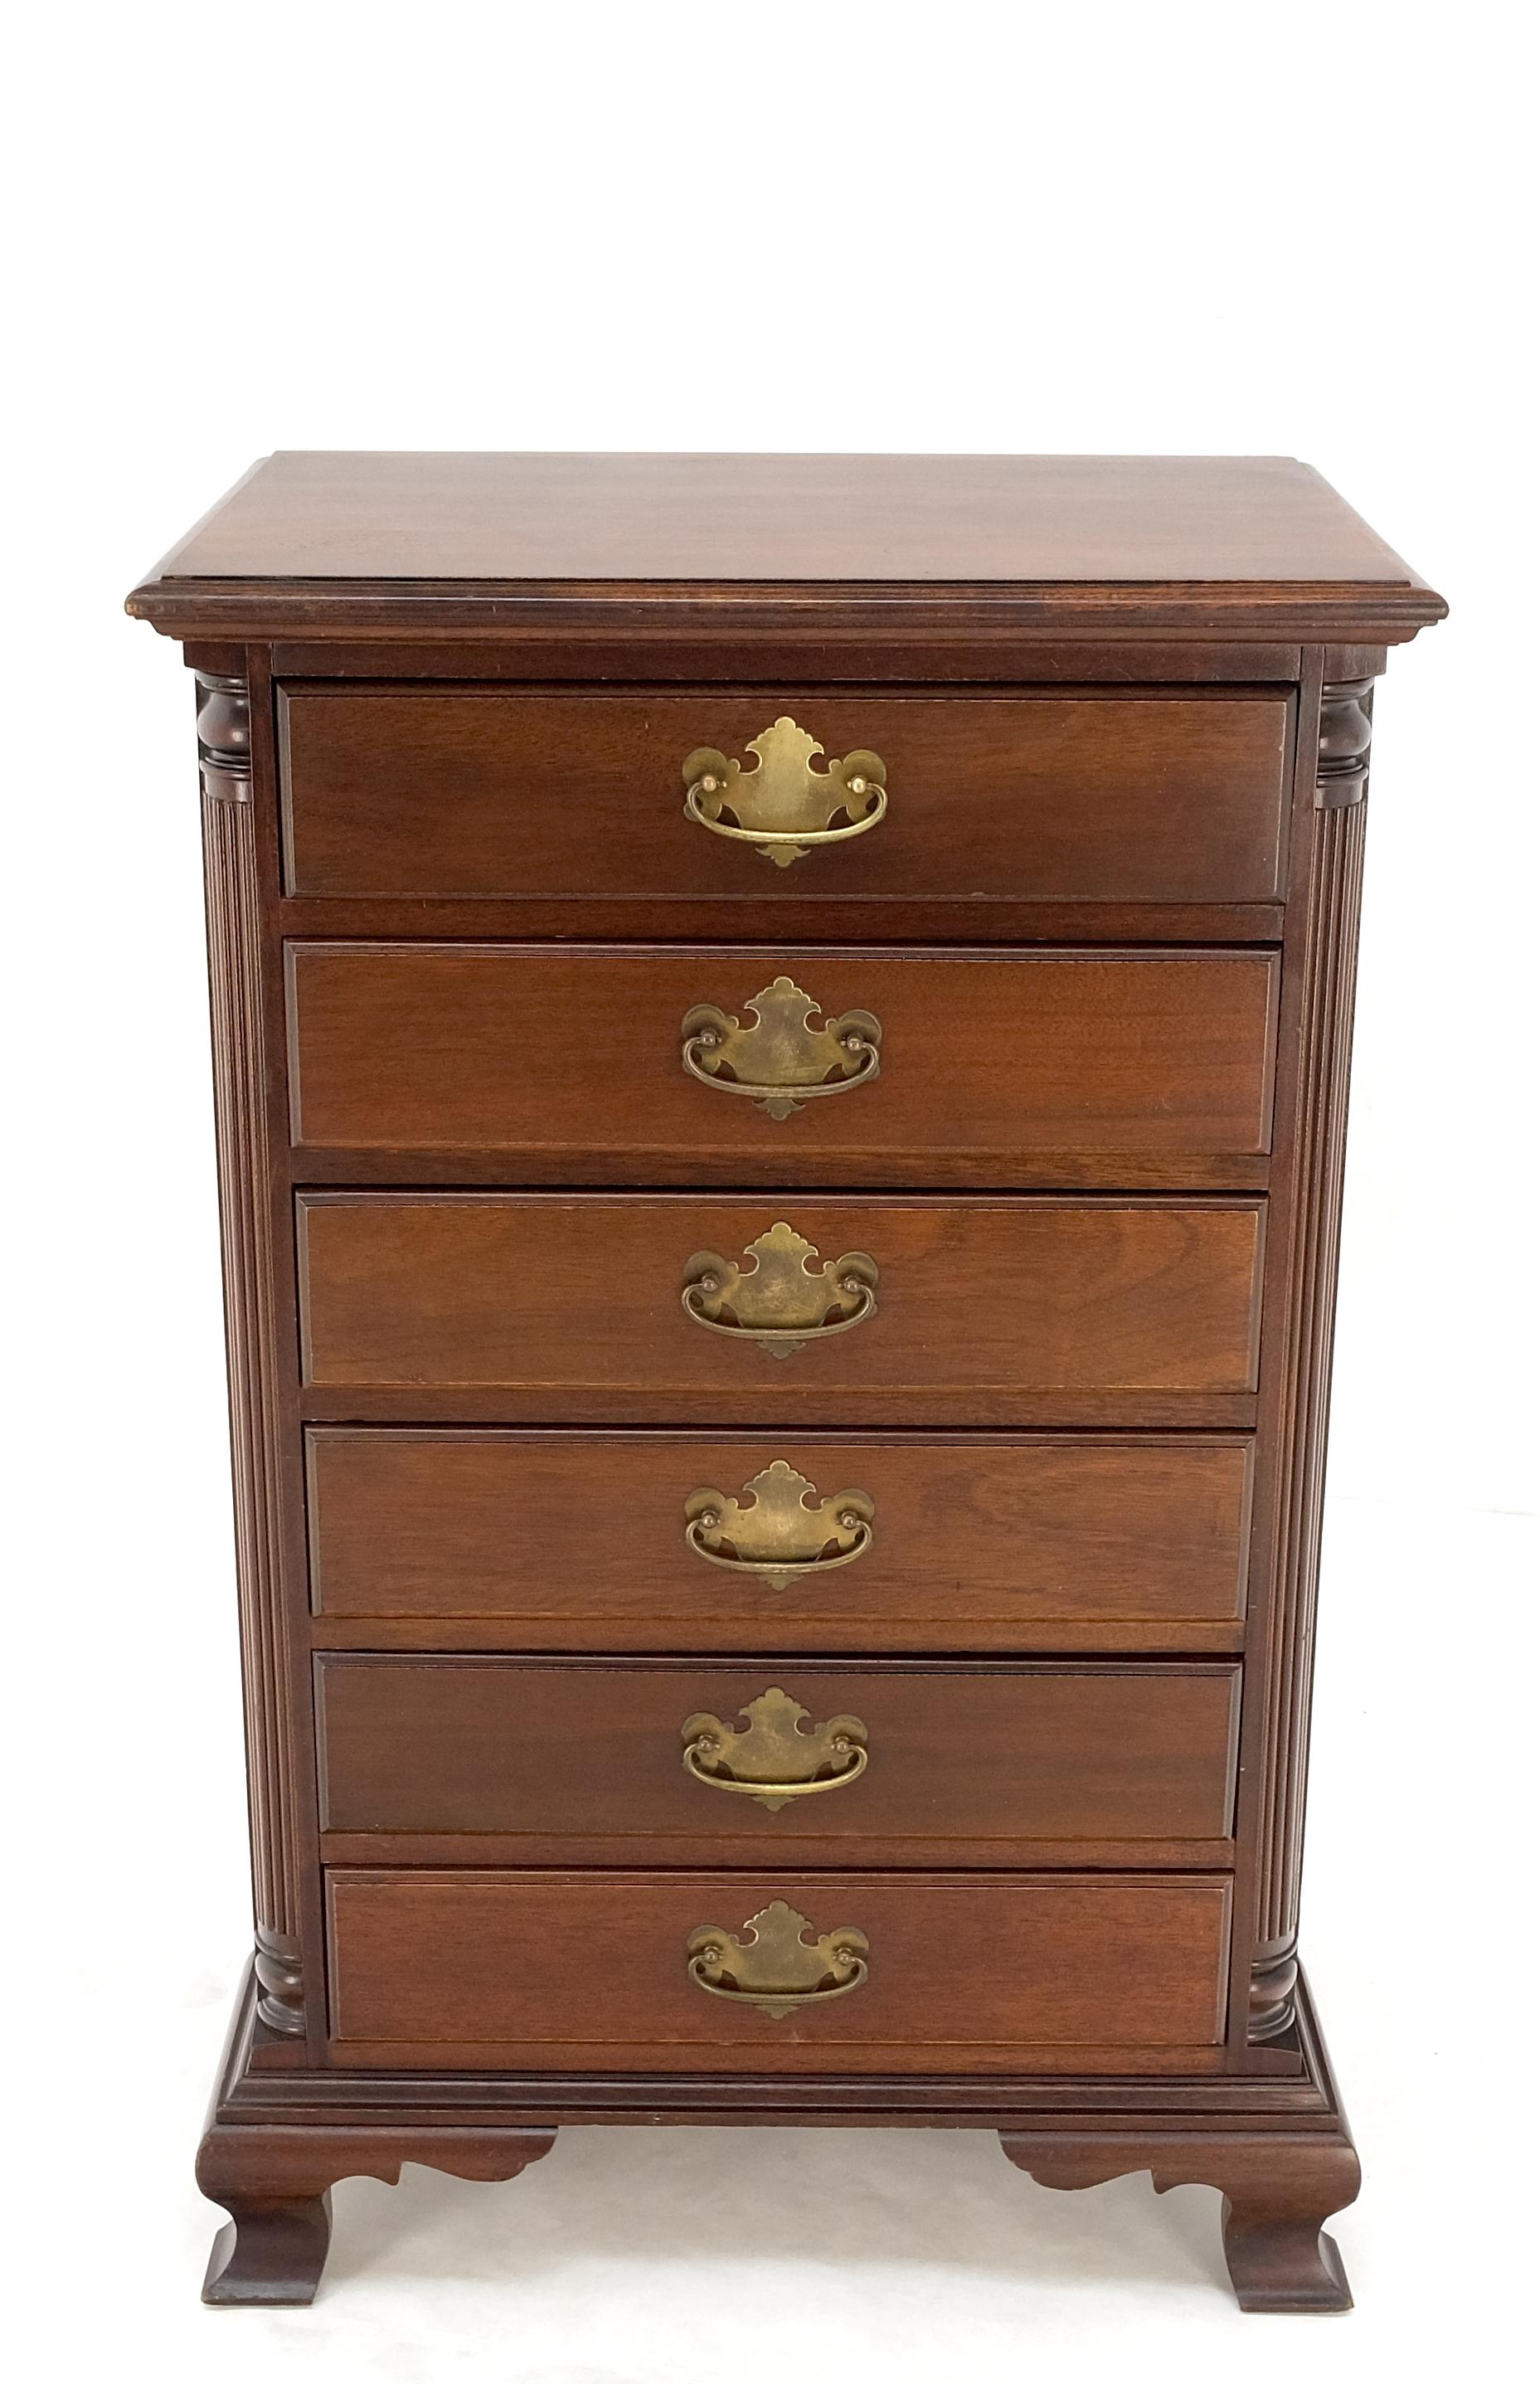 20th Century Bracket Feet Mahogany 6 Drawers Brass Pulls Tall Lingerie Chest Dresser Cabinet For Sale